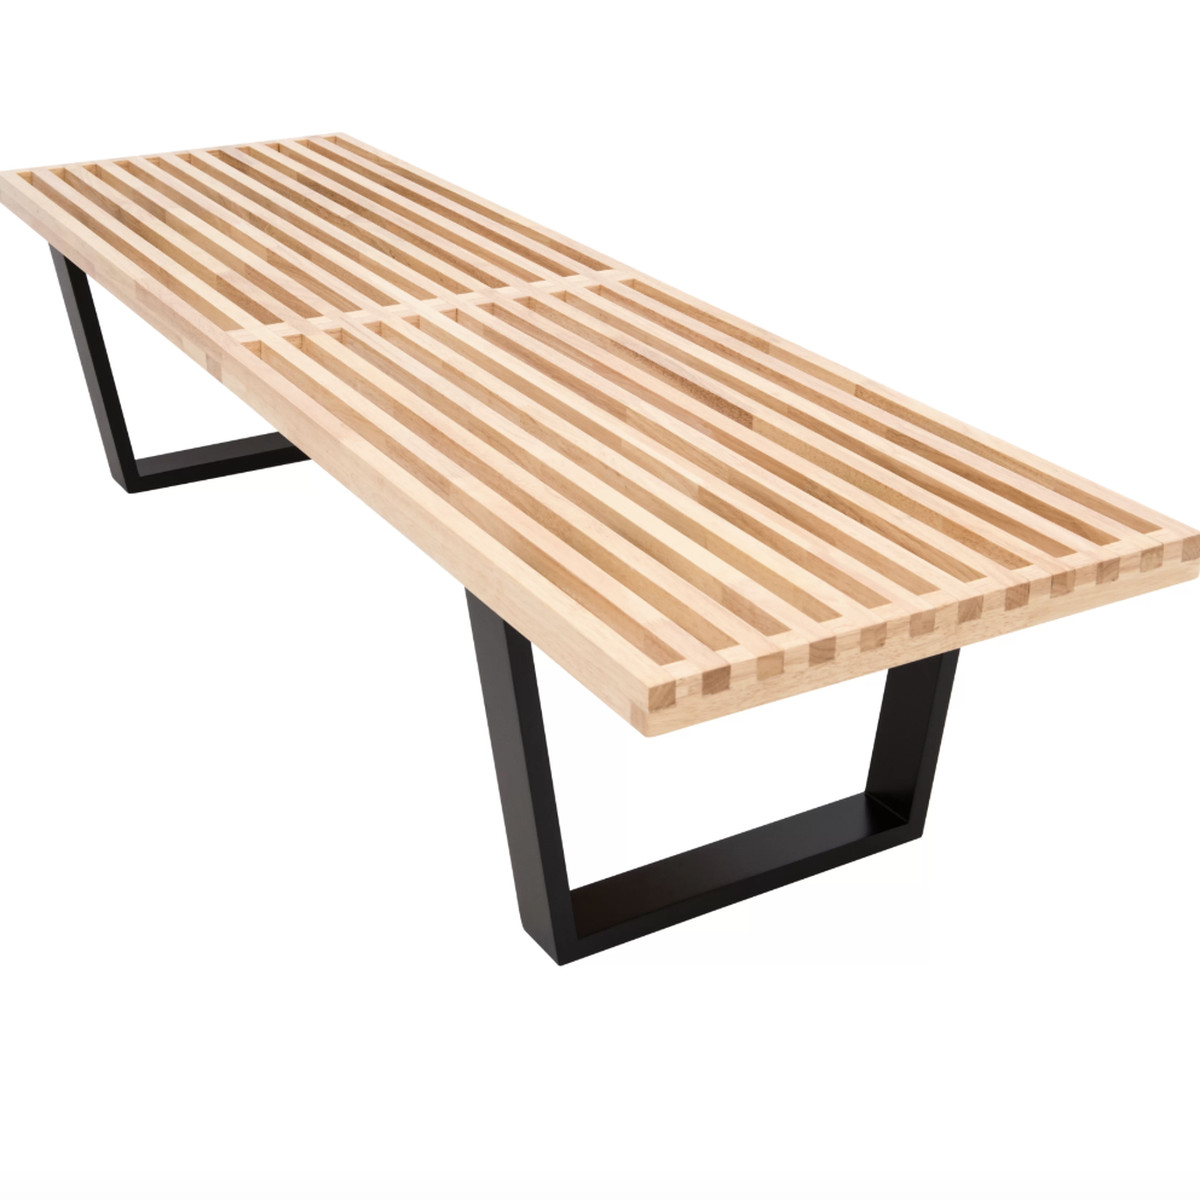 A wooden bench with a black base.